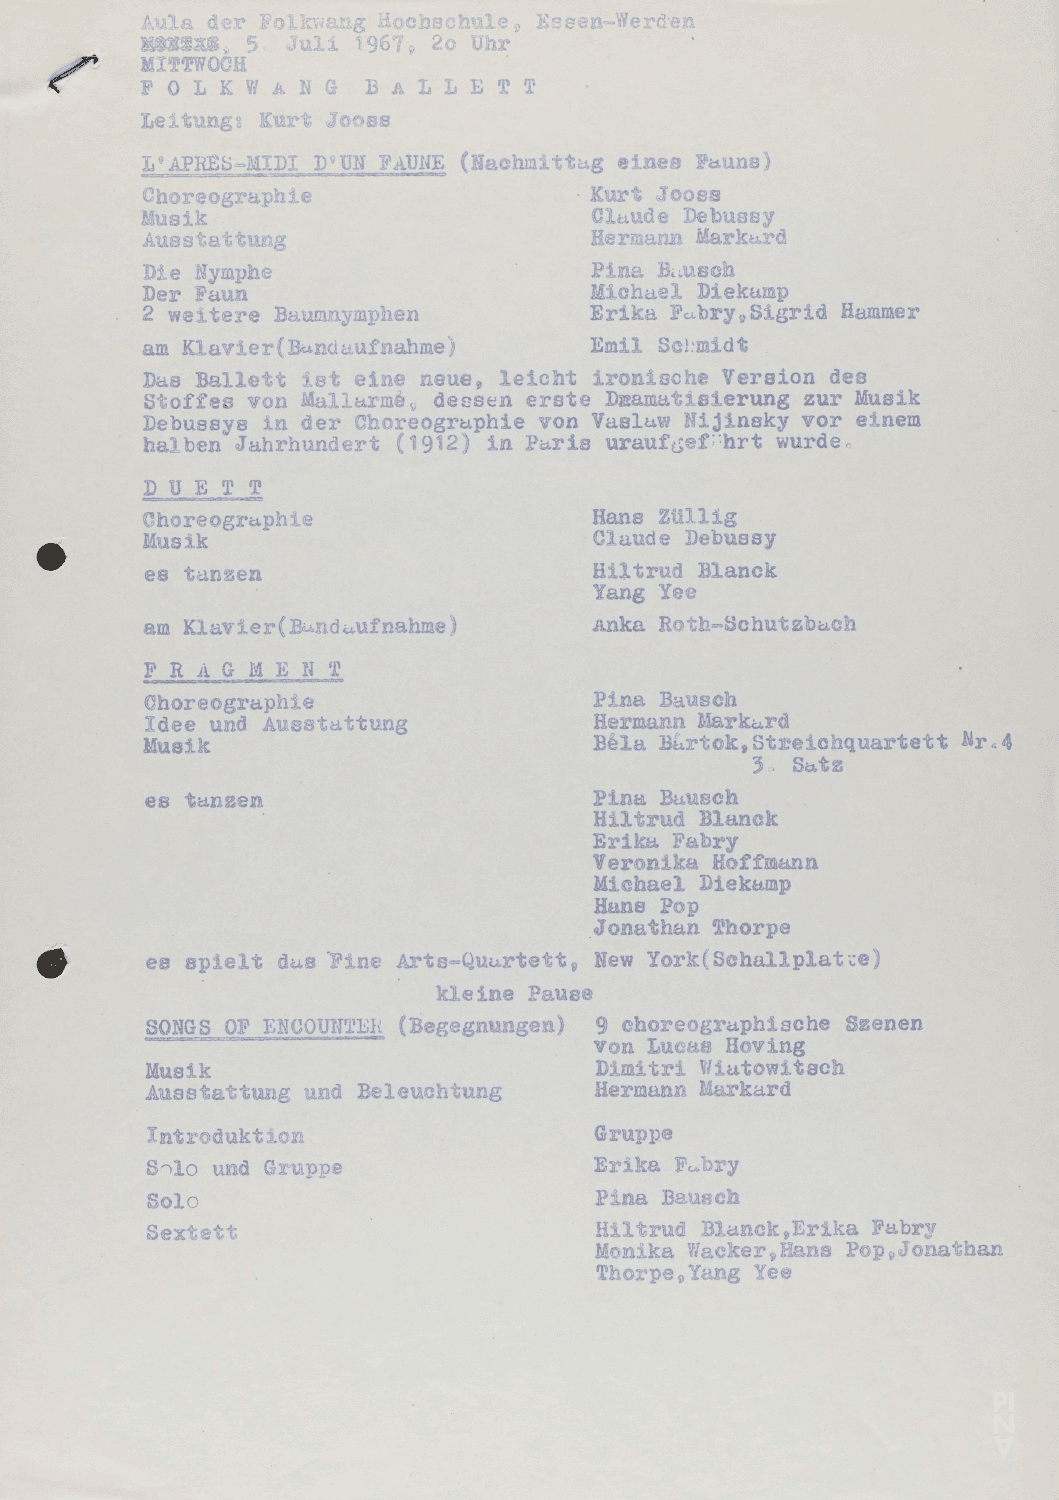 Evening leaflet for “Fragment” by Pina Bausch with Folkwangballett, “L'après-midi  d'un faune” and “The green Table” by Kurt Jooss with Folkwangballett and “Songs of Encounter” by Lucas Hoving with Folkwangballett in in Essen, July 5, 1967